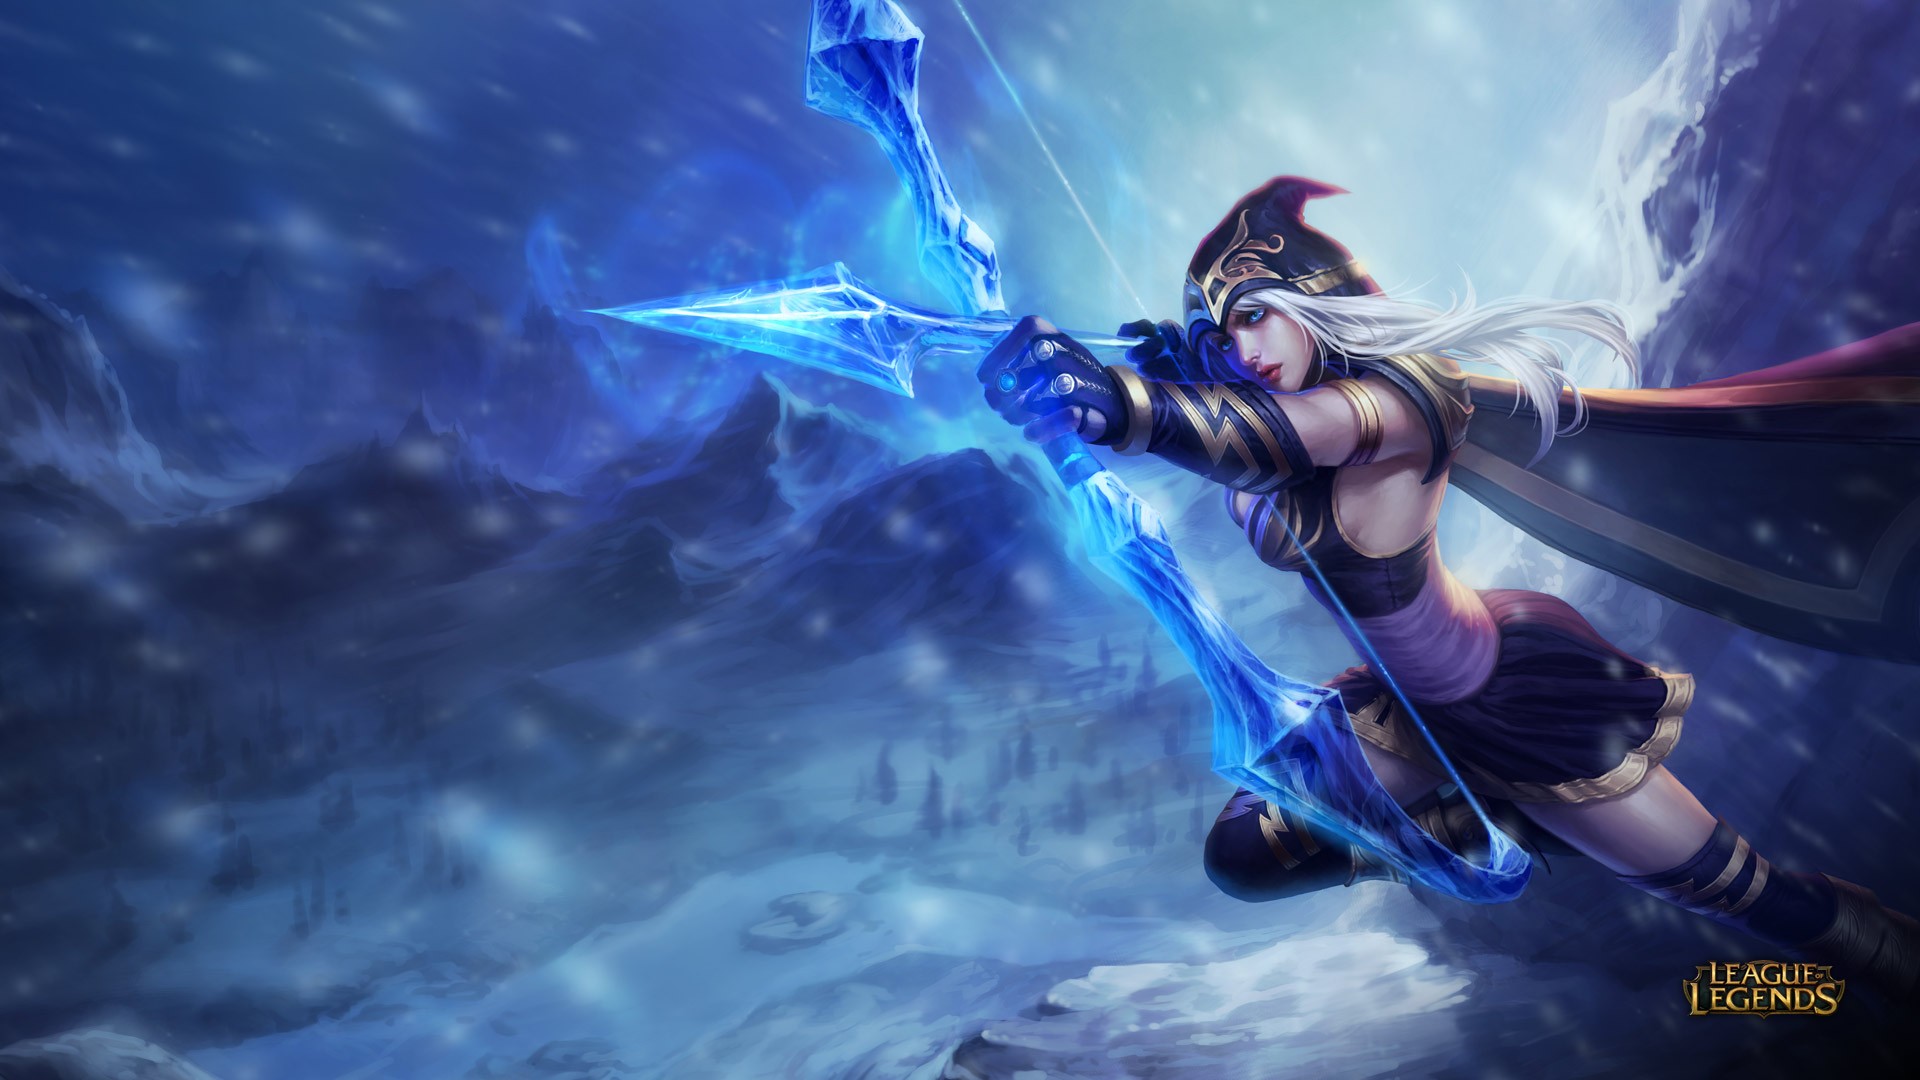 Anime 1920x1080 League of Legends Ashe (League of Legends) video game warriors fantasy girl bow fantasy art PC gaming bow and arrow video game girls